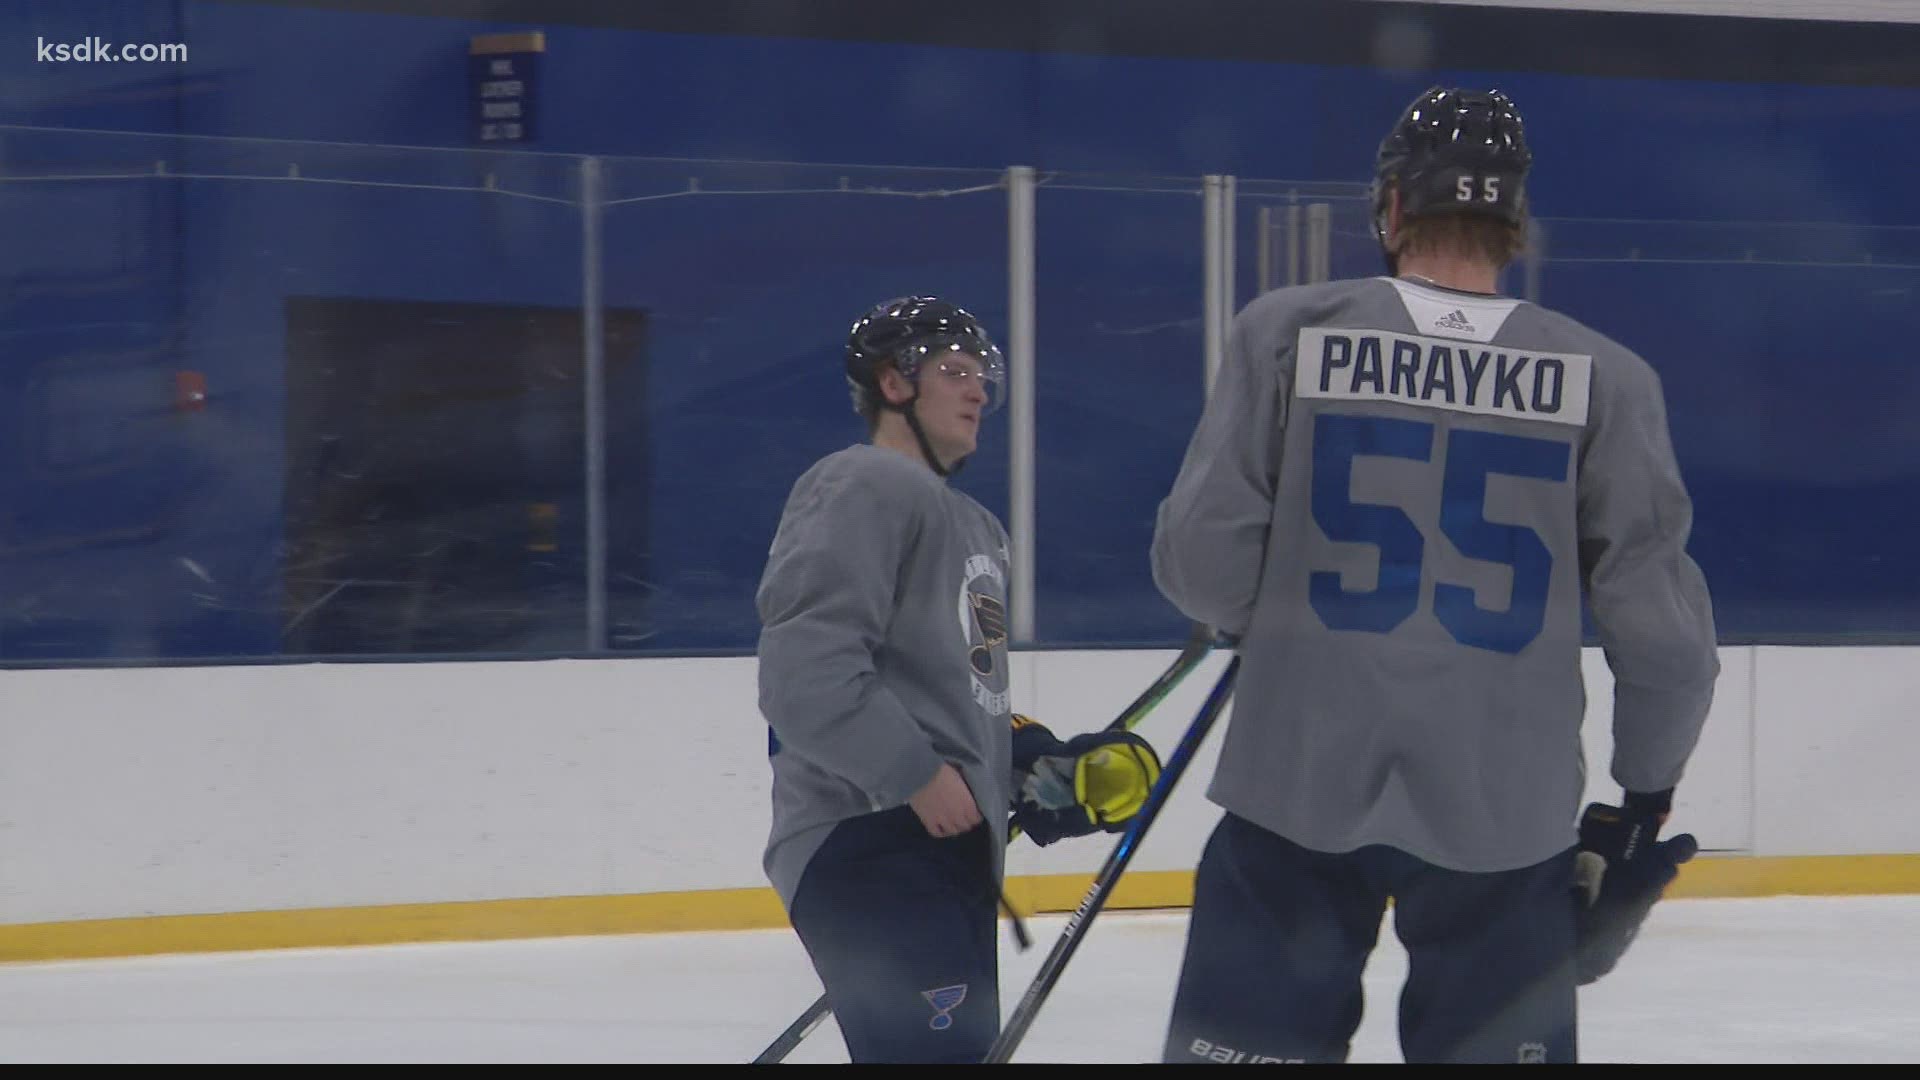 Without Alex Pietrangelo in the picture, Parayko and Krug will have a lot of responsibility this season